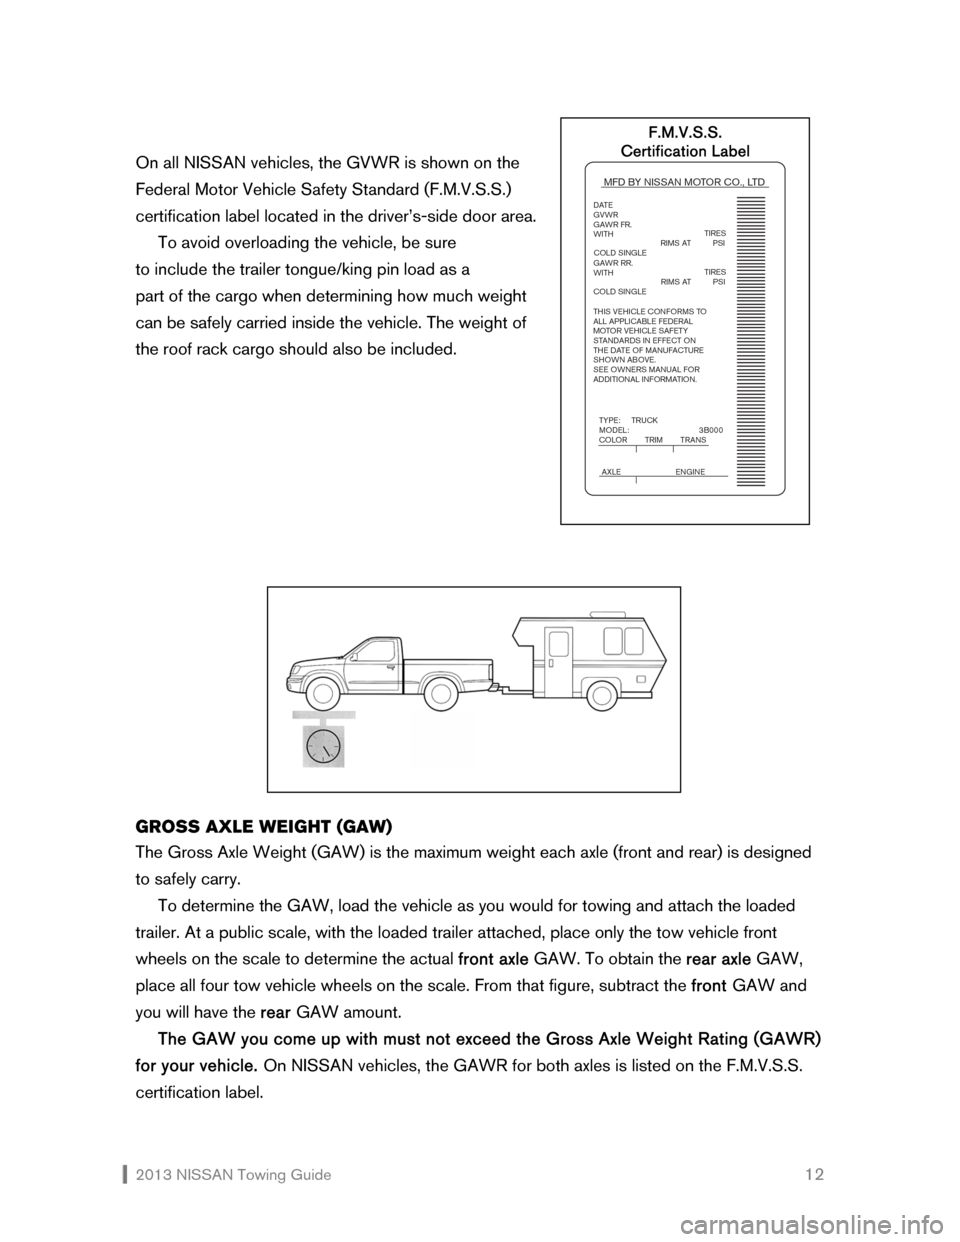 NISSAN CUBE 2013 3.G Towing Guide  2013 NISSAN Towing Guide    12 On all NISSAN vehicles, the GVWR is shown on the  
Federal Motor Vehicle Safety Standard (F.M.V.S.S.) 
certification label located in the driver’s-side door area.  
 